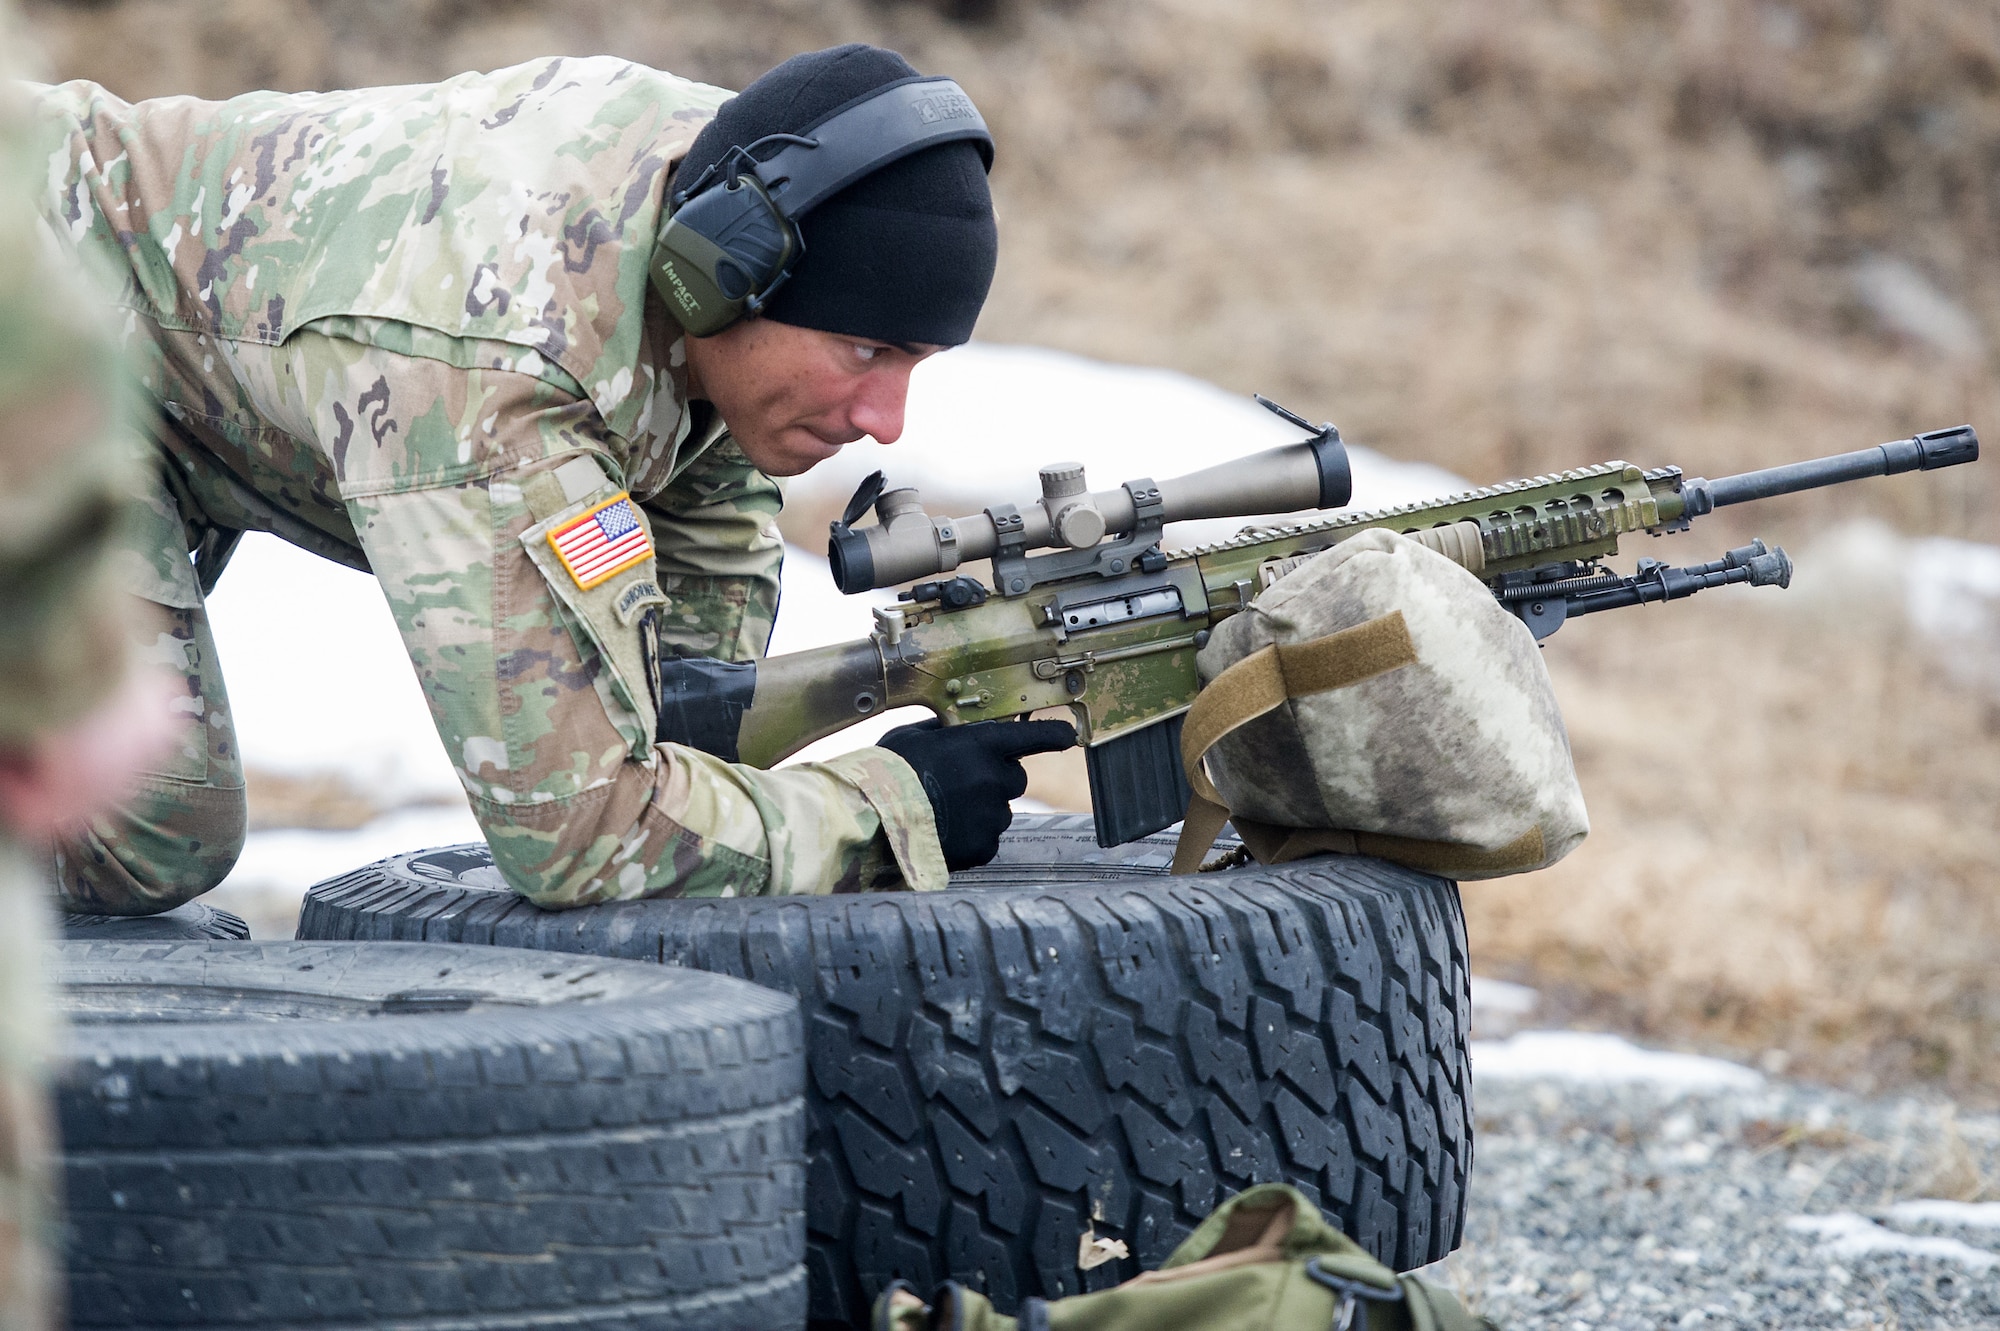 Army Spc. Arturo Dominguez, a native of Okeechobee, Fla., assigned to Charlie Troop, 1st Squadron, 40th Cavalry Regiment (Airborne), 4th Infantry Brigade Combat Team (Airborne), 25th Infantry Division, U.S. Army Alaska, gets in the prone position to fire a M110 Semi-Automatic Sniper System on Statler range at Joint Base Elmendorf-Richardson, Alaska, April 6, 2018, during marksmanship training.  A sniper's main responsibility is to deliver discriminatory, highly accurate rifle fire against enemy targets that cannot be engaged successfully by the regular rifleman due to range, size, location, fleeting nature, or visibility.